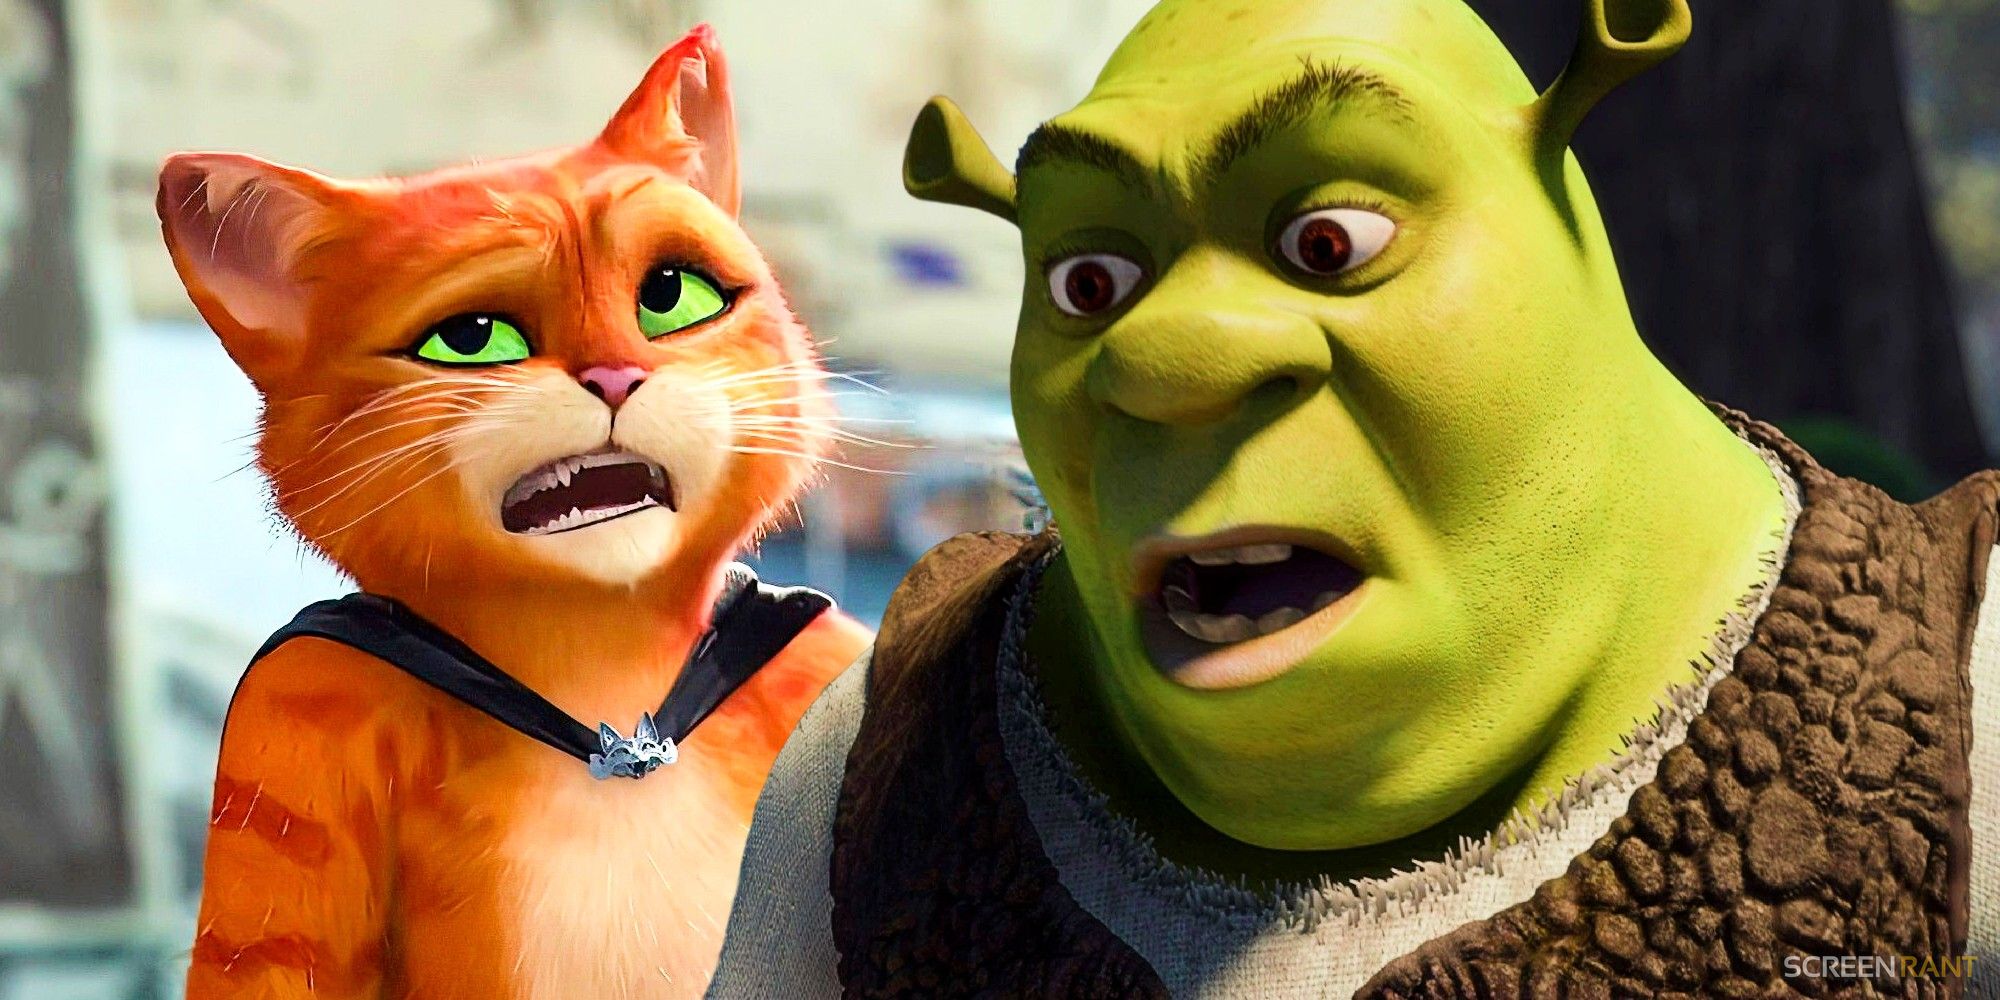 Puss in Boots talking in Puss in Boots: The Last Wish and Shrek surprised in Shrek